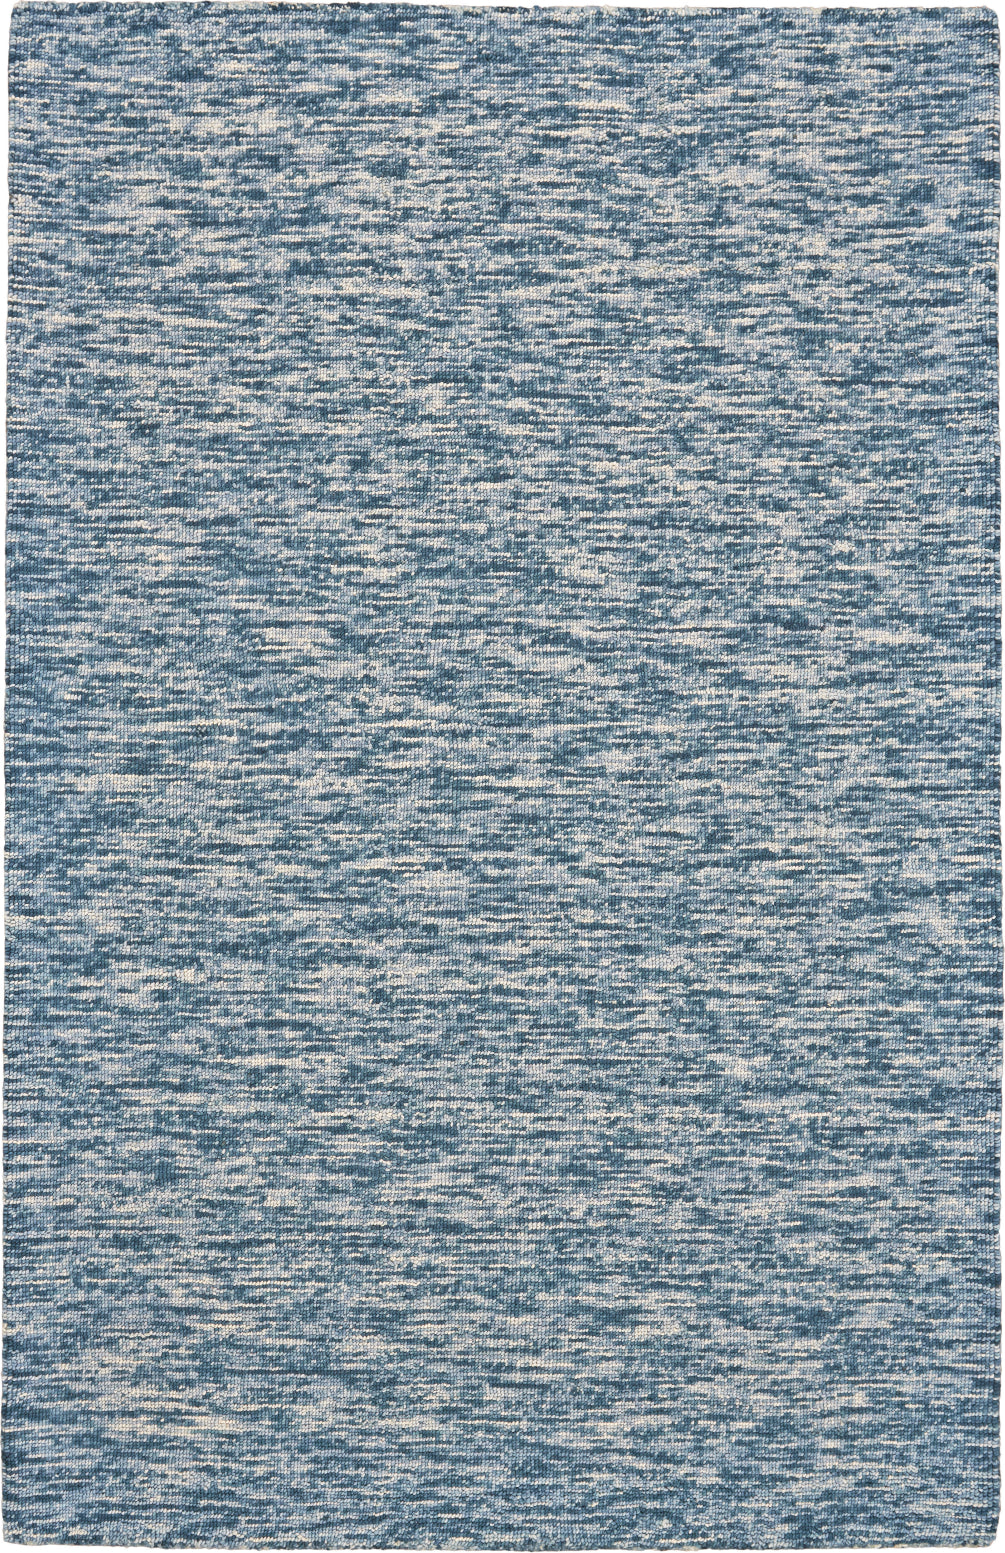 Feizy Cora 8441F Teal Area Rug